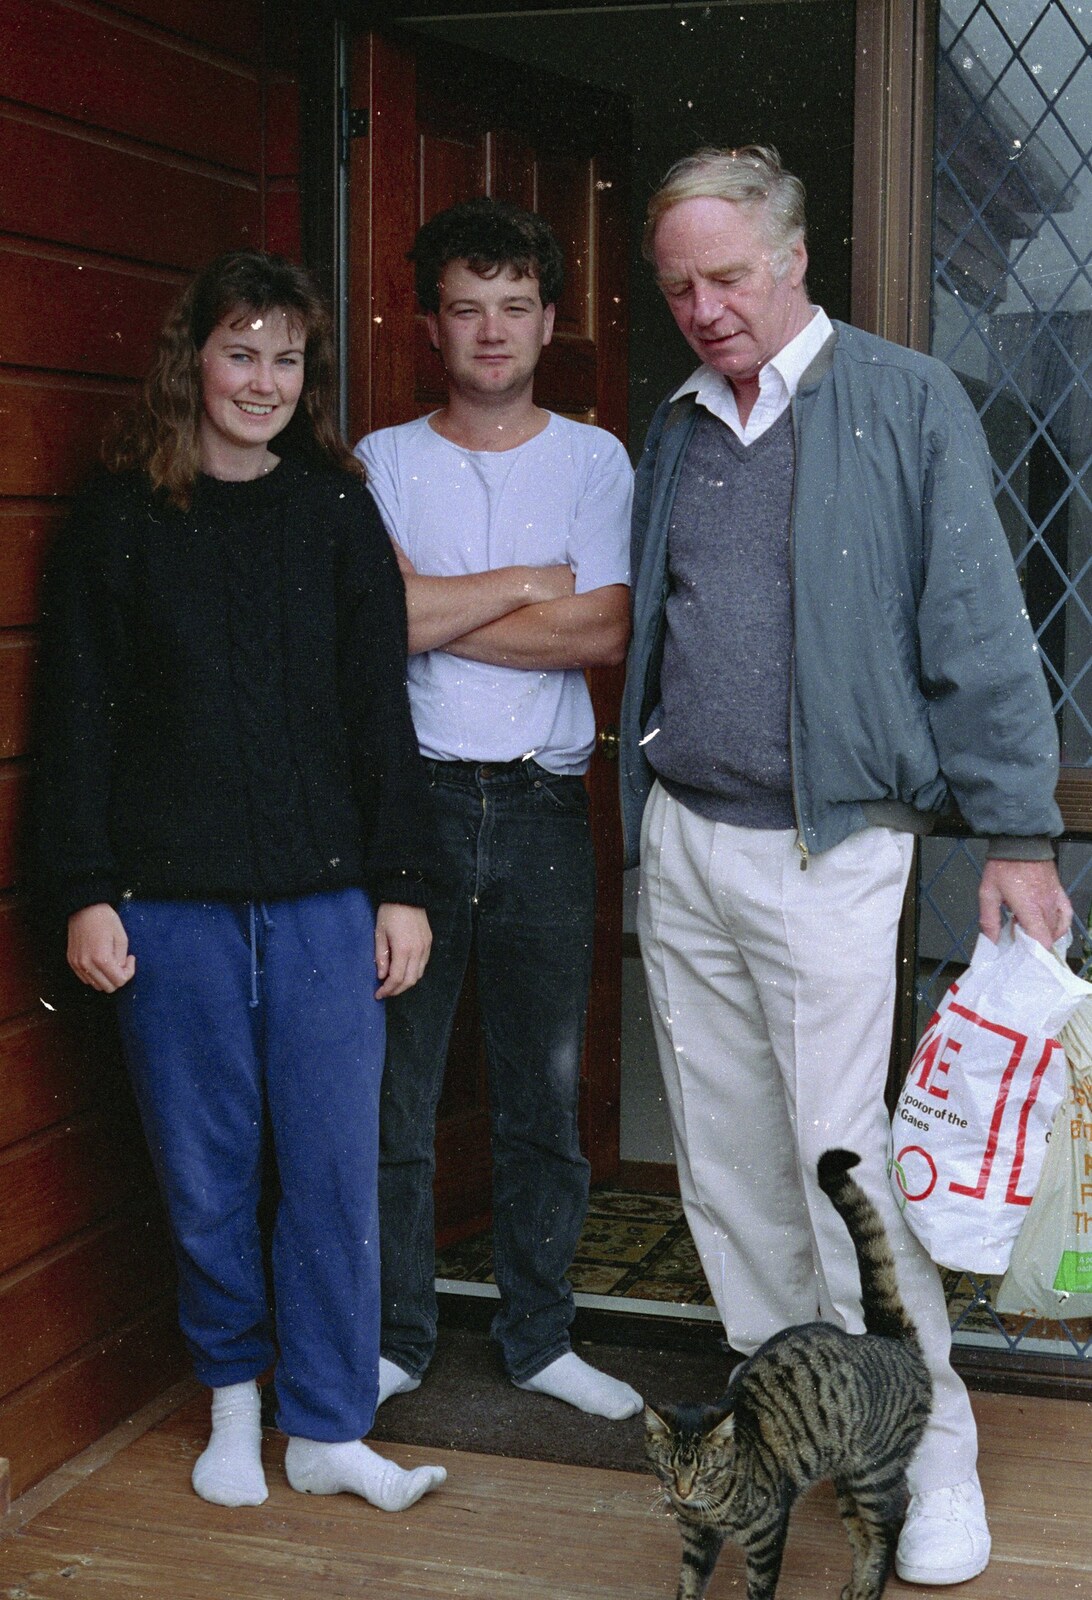 Christine, her husband, The Old Chap and Zack the cat from A Road-trip Through Rotorua to Palmerston, North Island, New Zealand - 27th November 1992